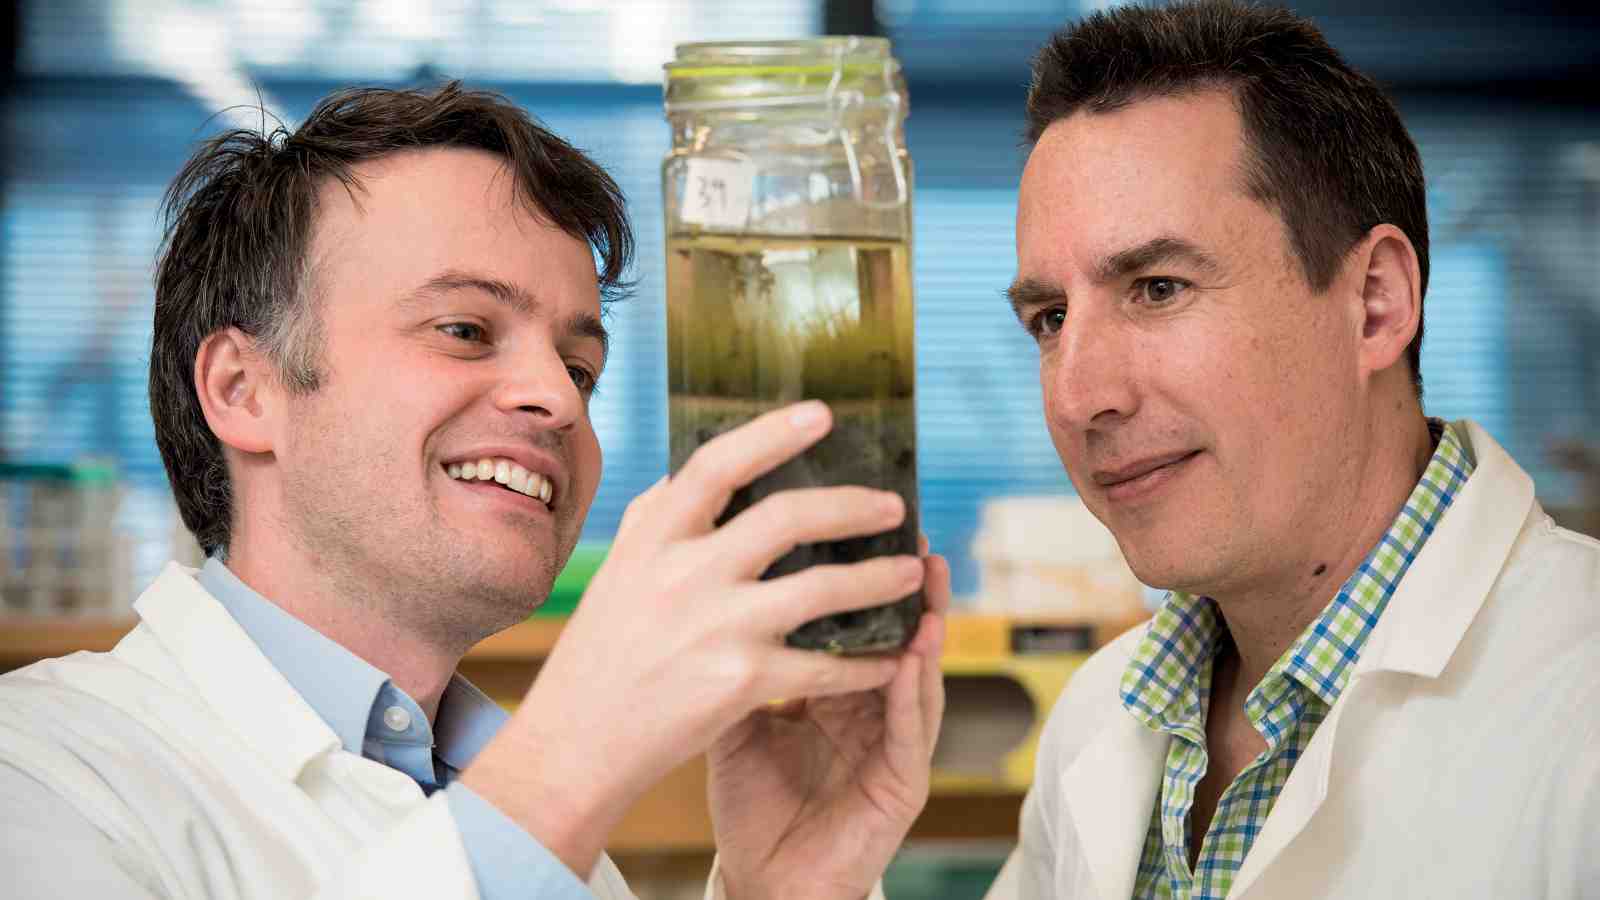 Dr Jeremy Owen and Associate Professor David Ackerley in the research lab looking at a specimen in a jar